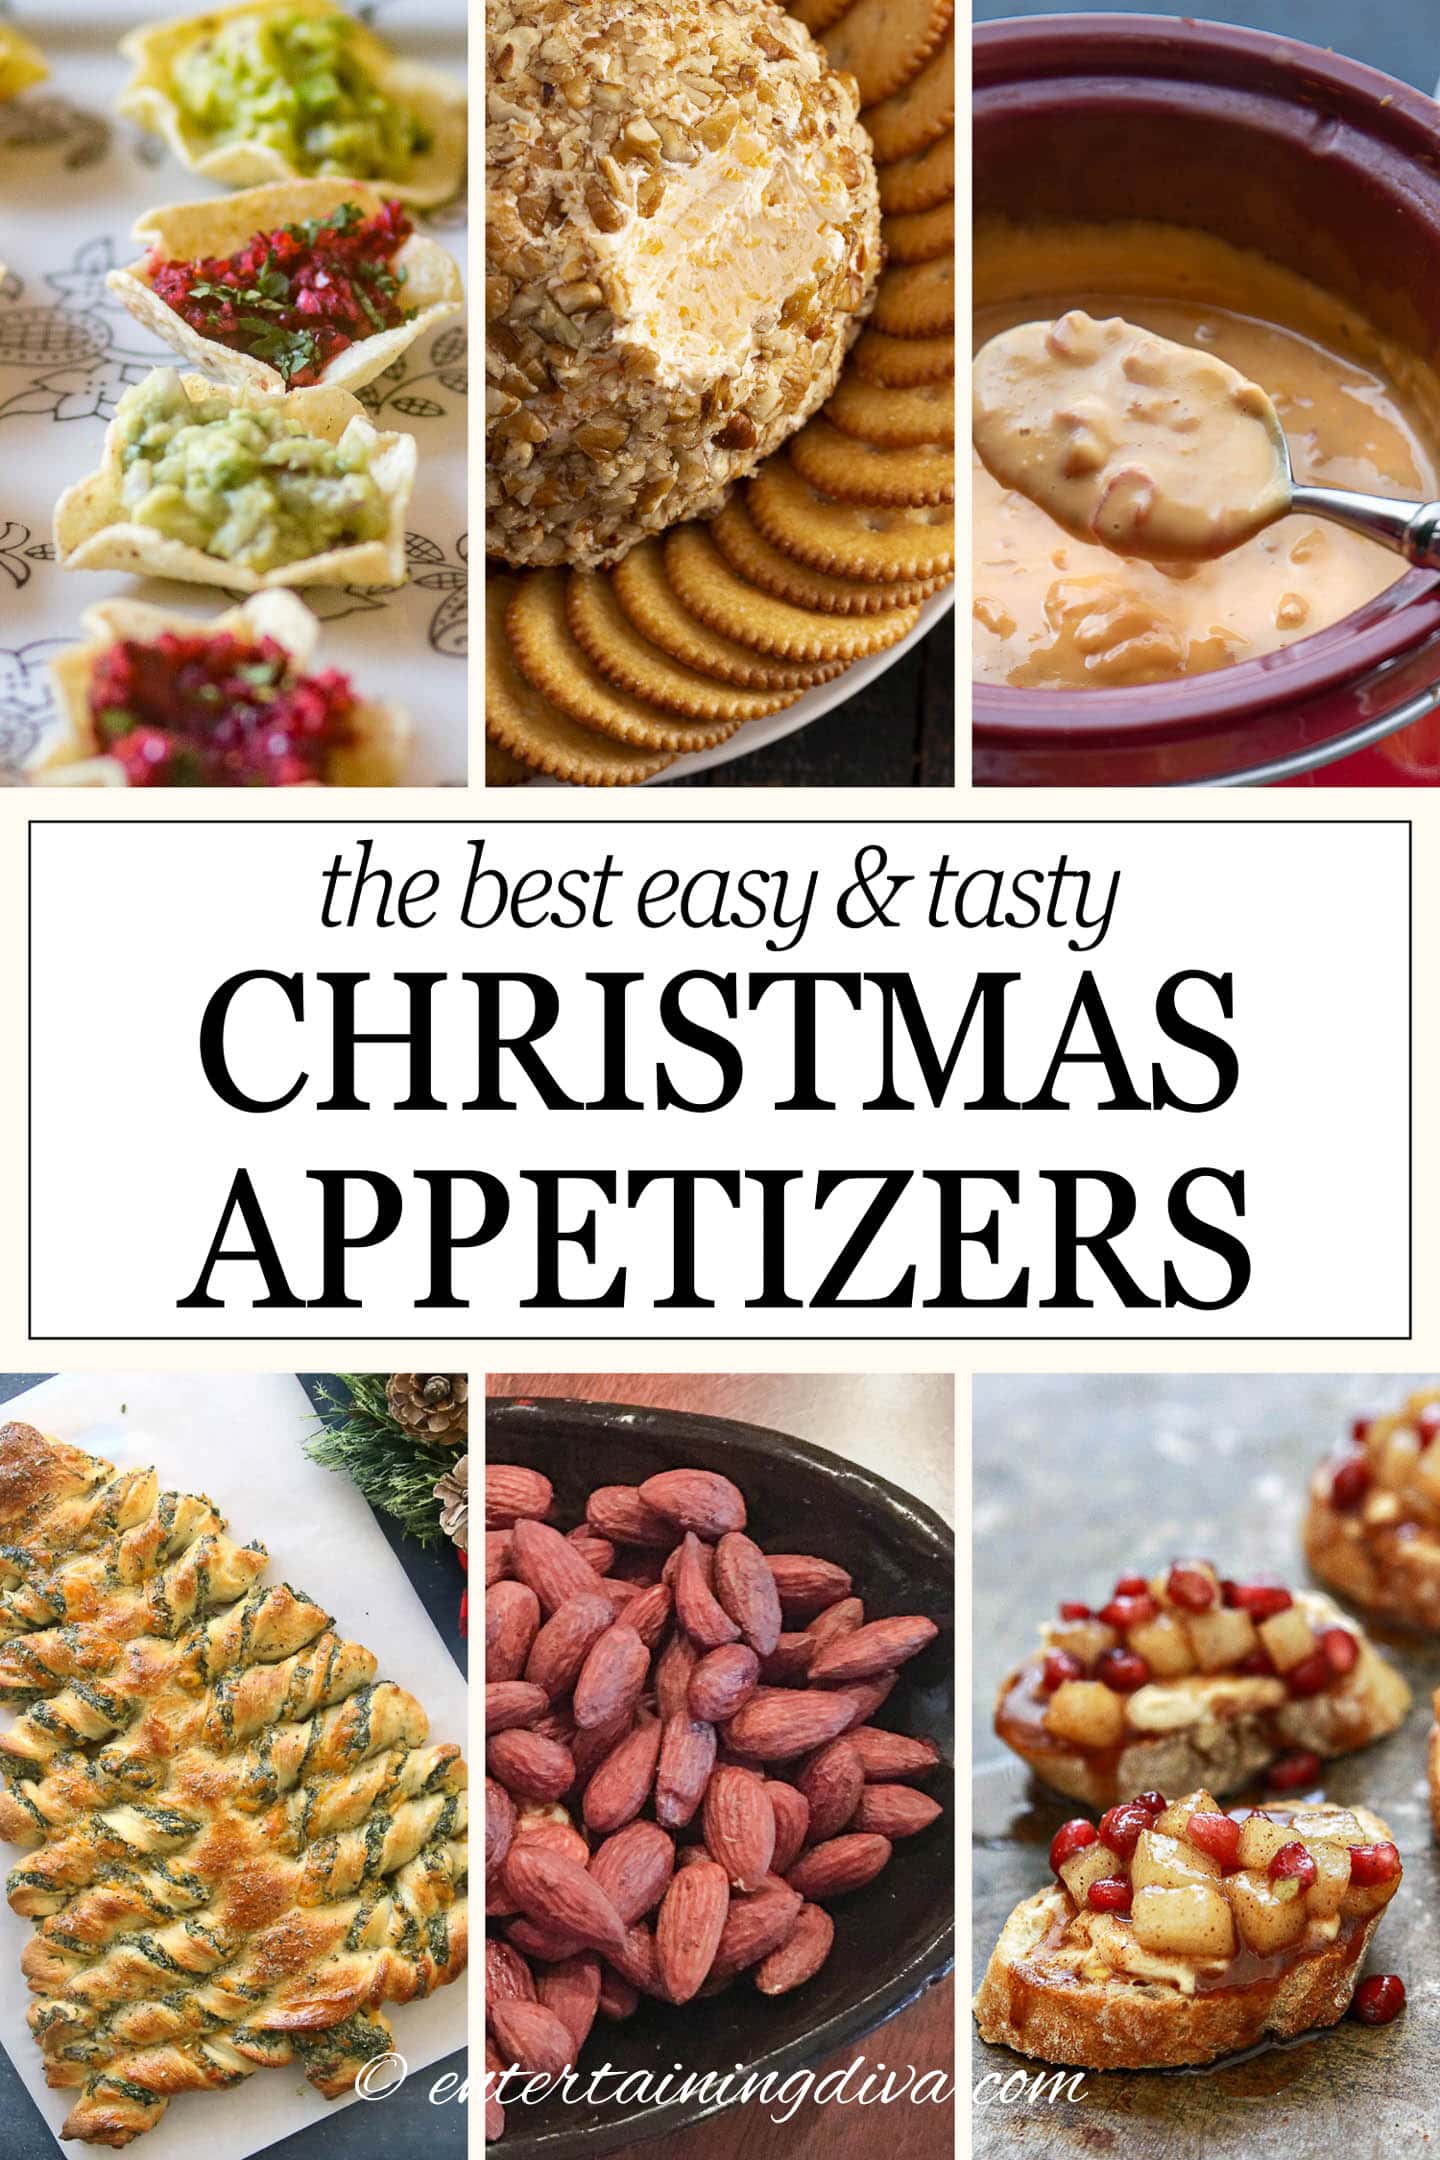 The best easy and tasty Christmas appetizers